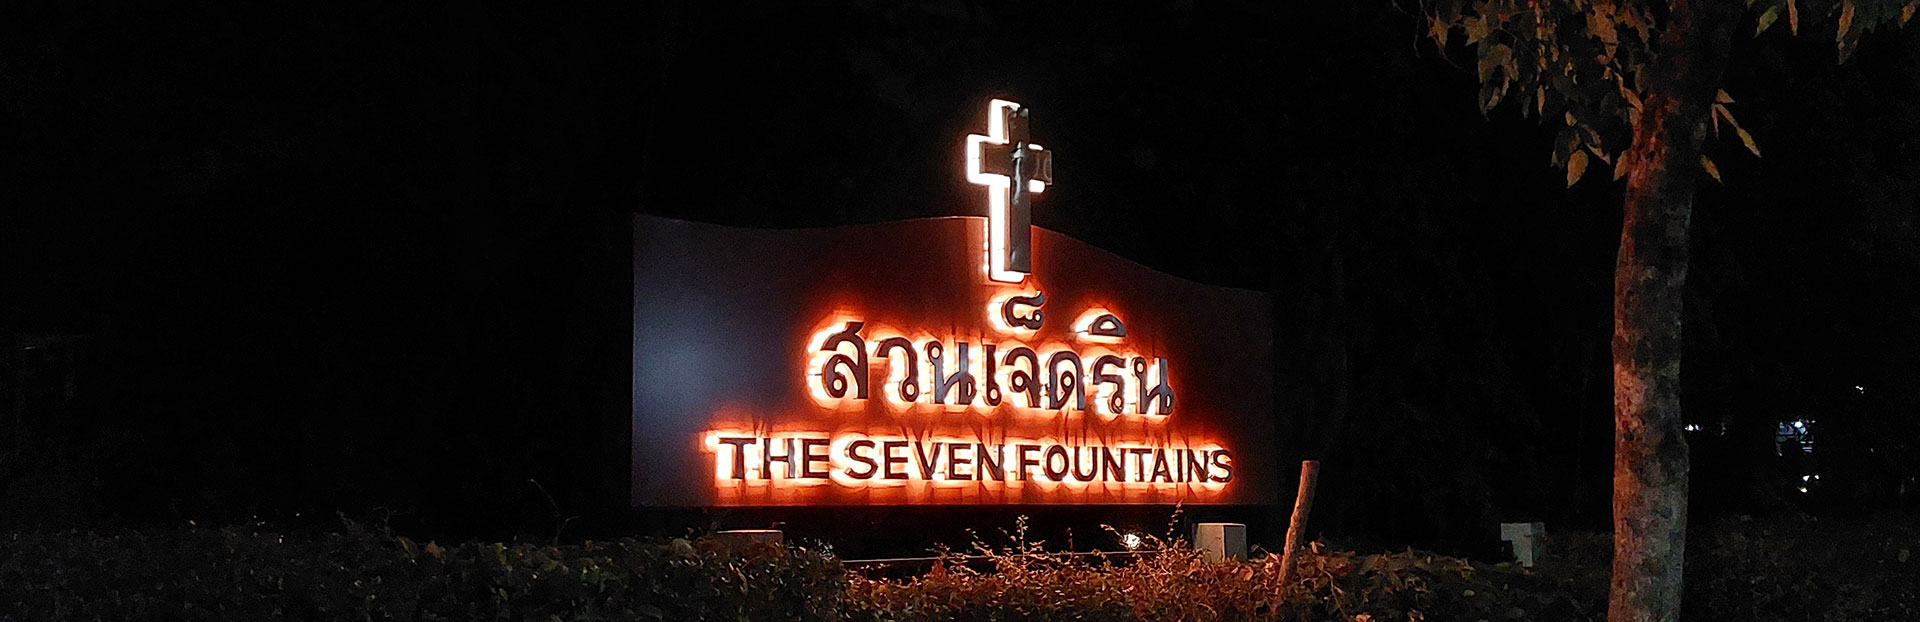 “Seven Fountains”: the seven springs of the Spirit to discover meaning in life